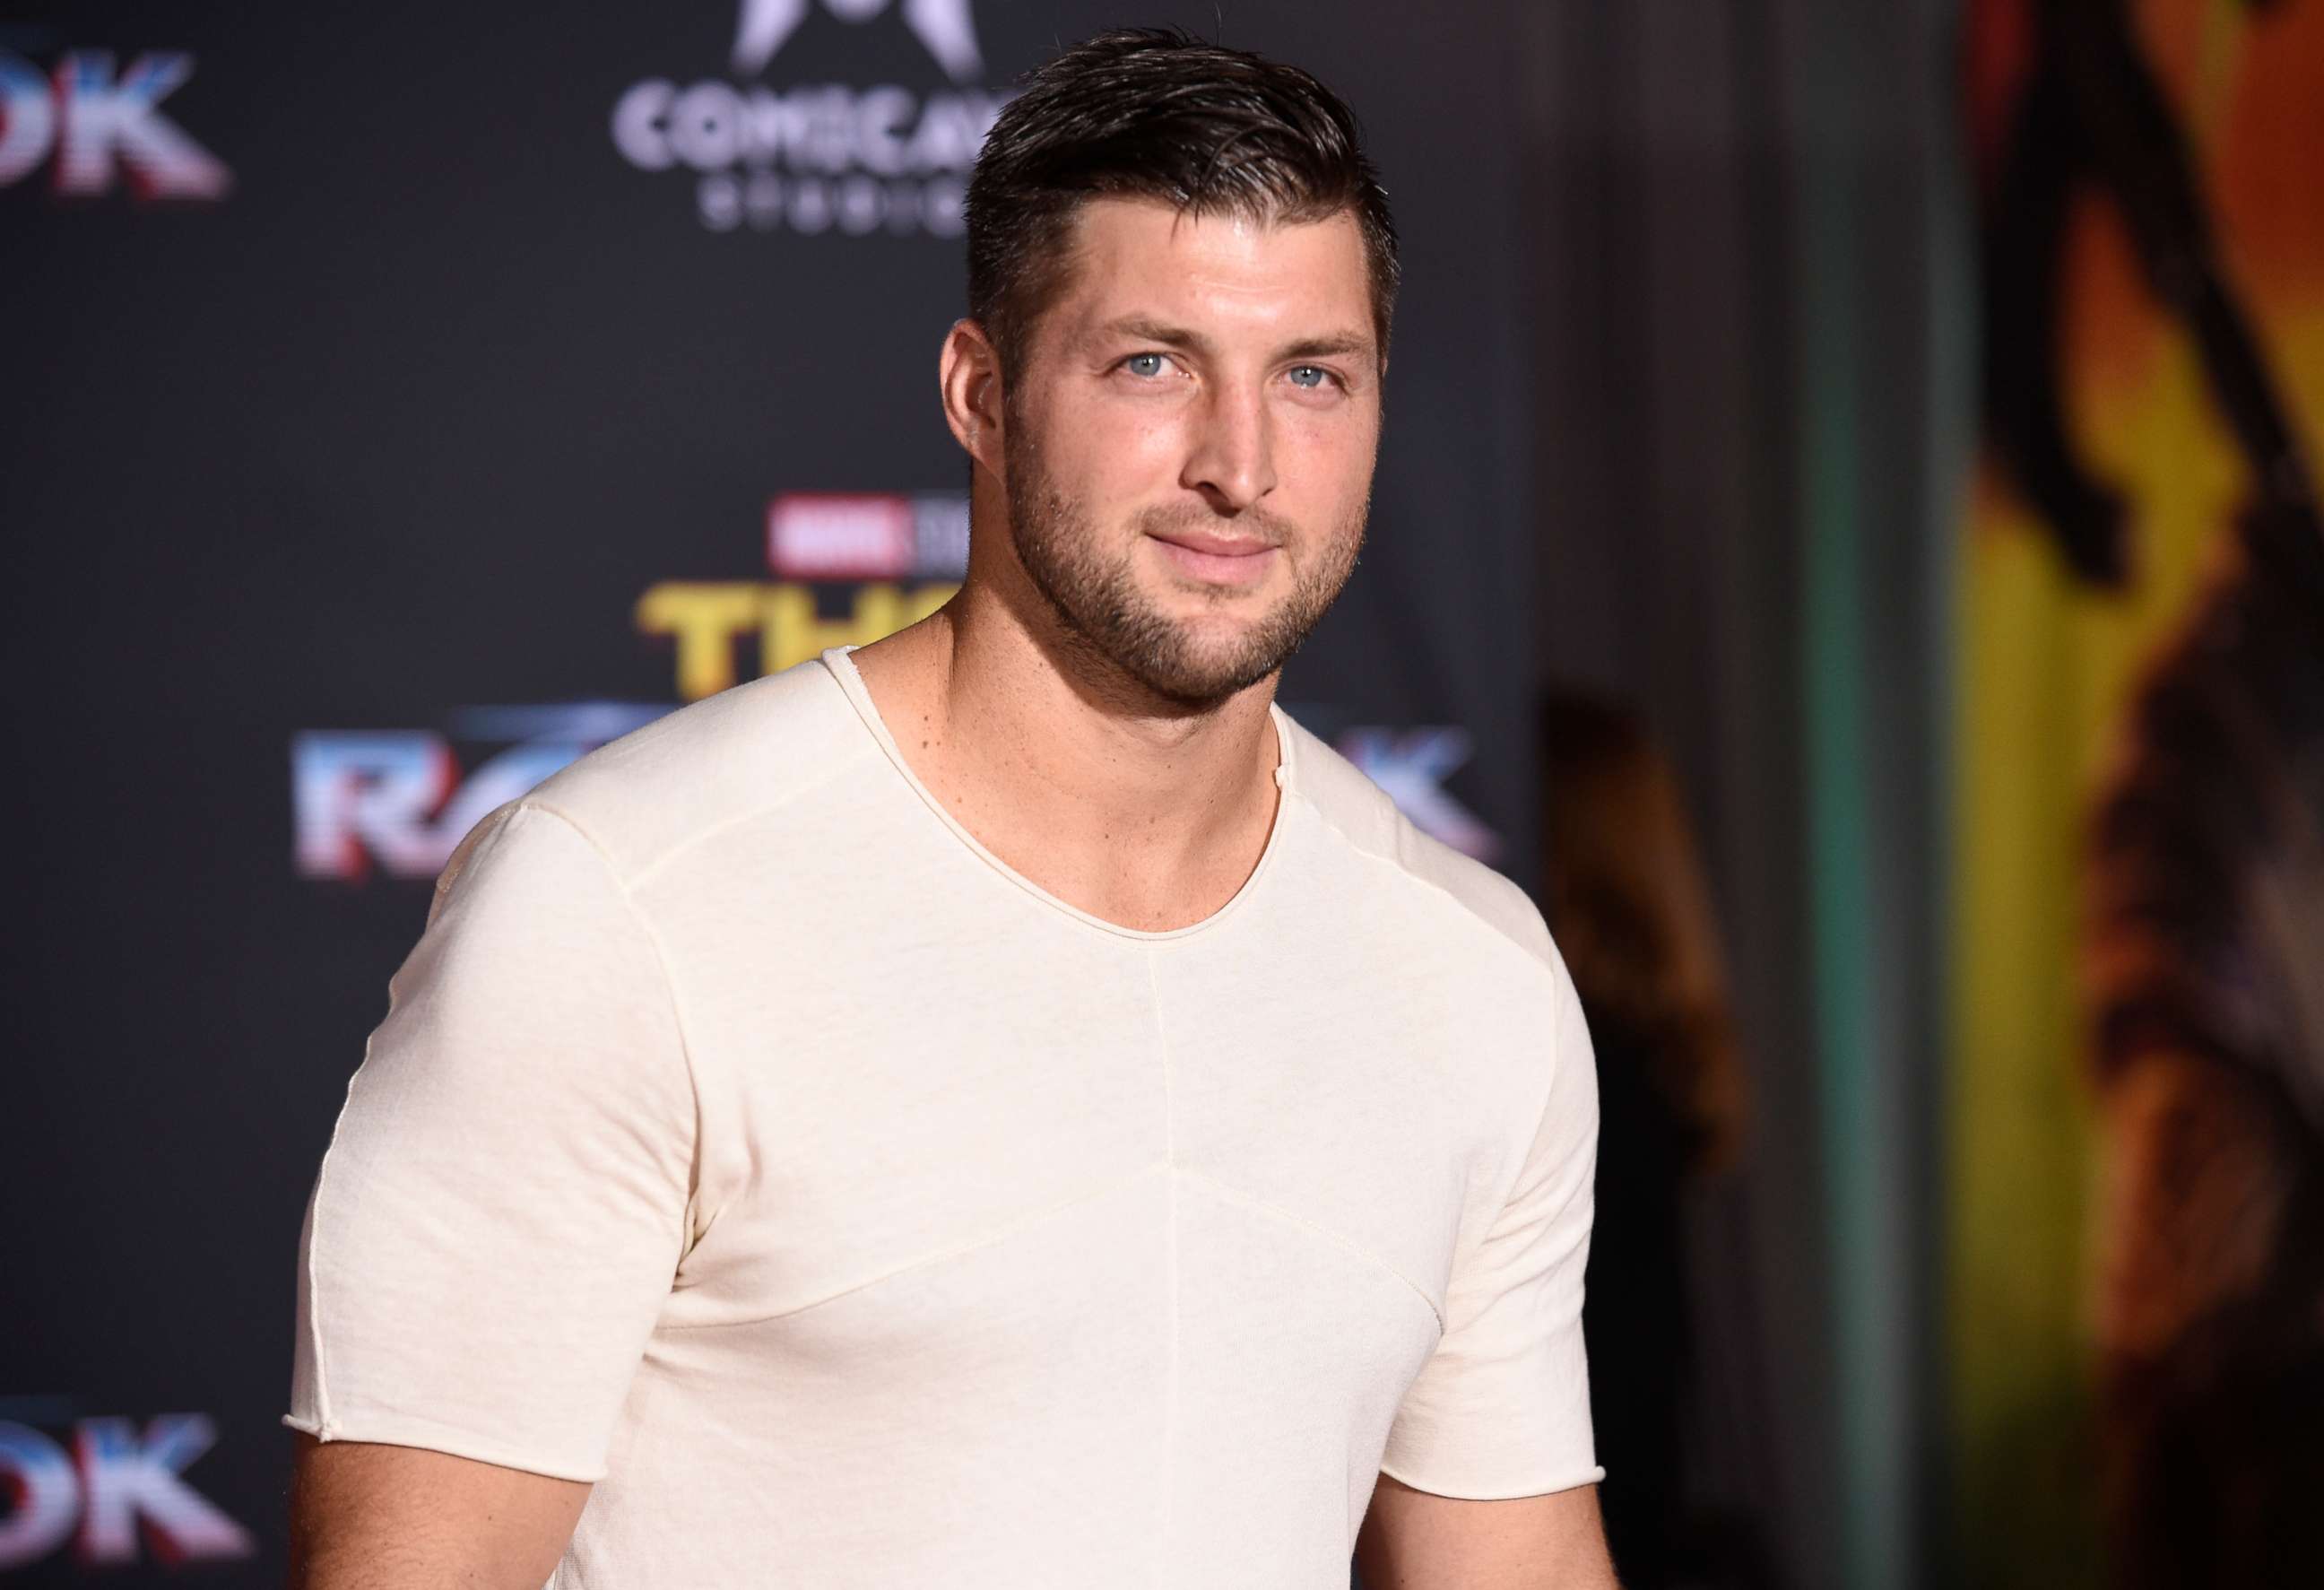 Tim Tebow shares advice on how to seize the day in new book - ABC News